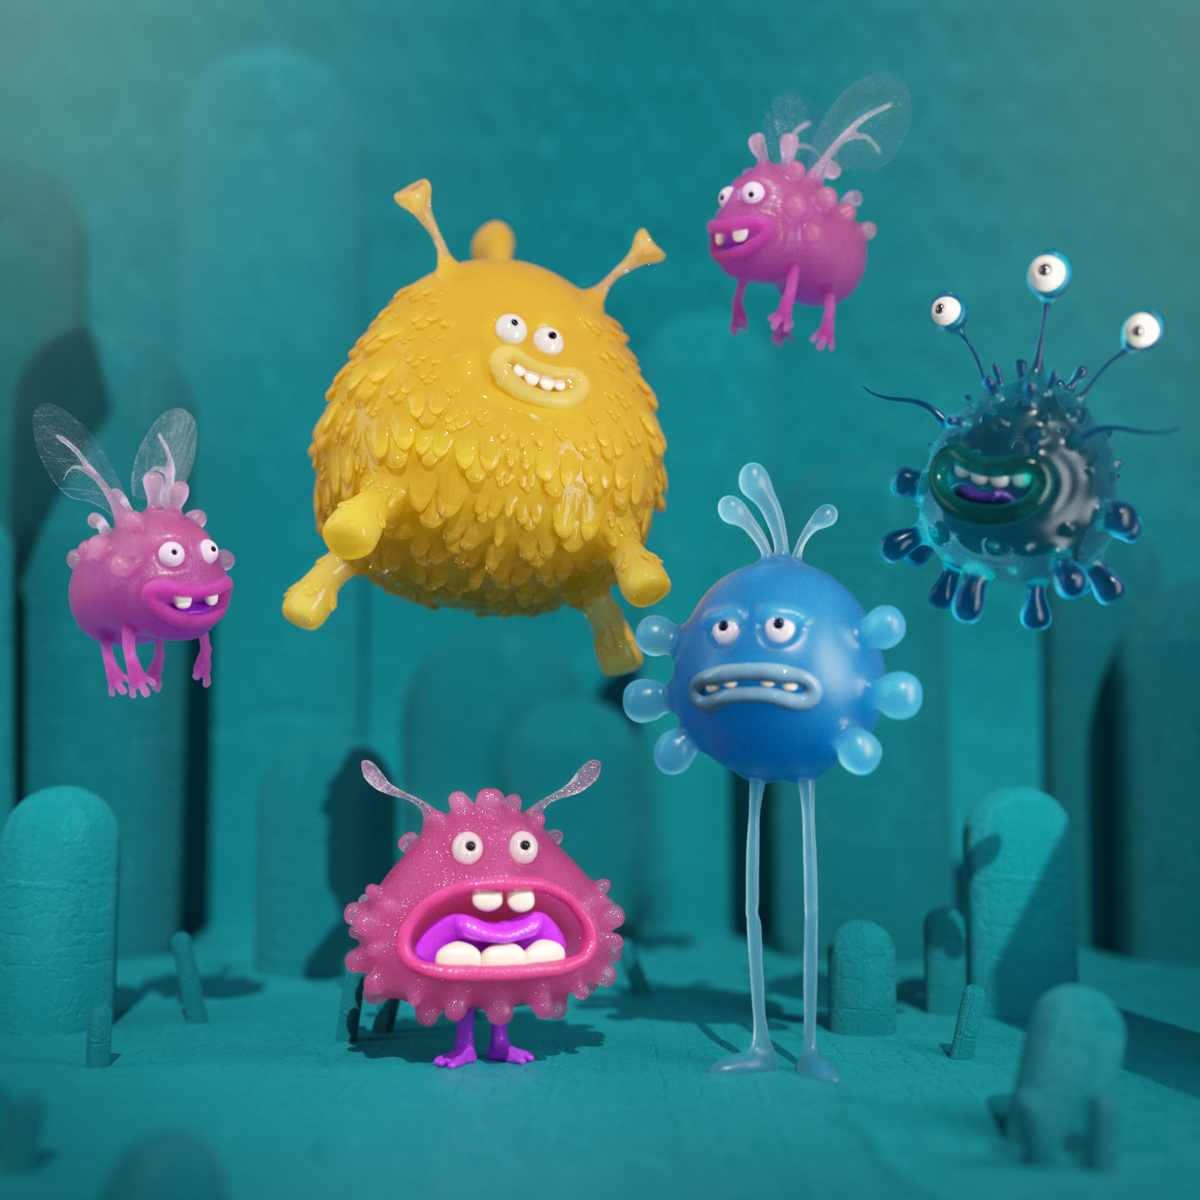 stupid friends cinema4d 3D Character c4d characterdesign monsters funny Zbrush